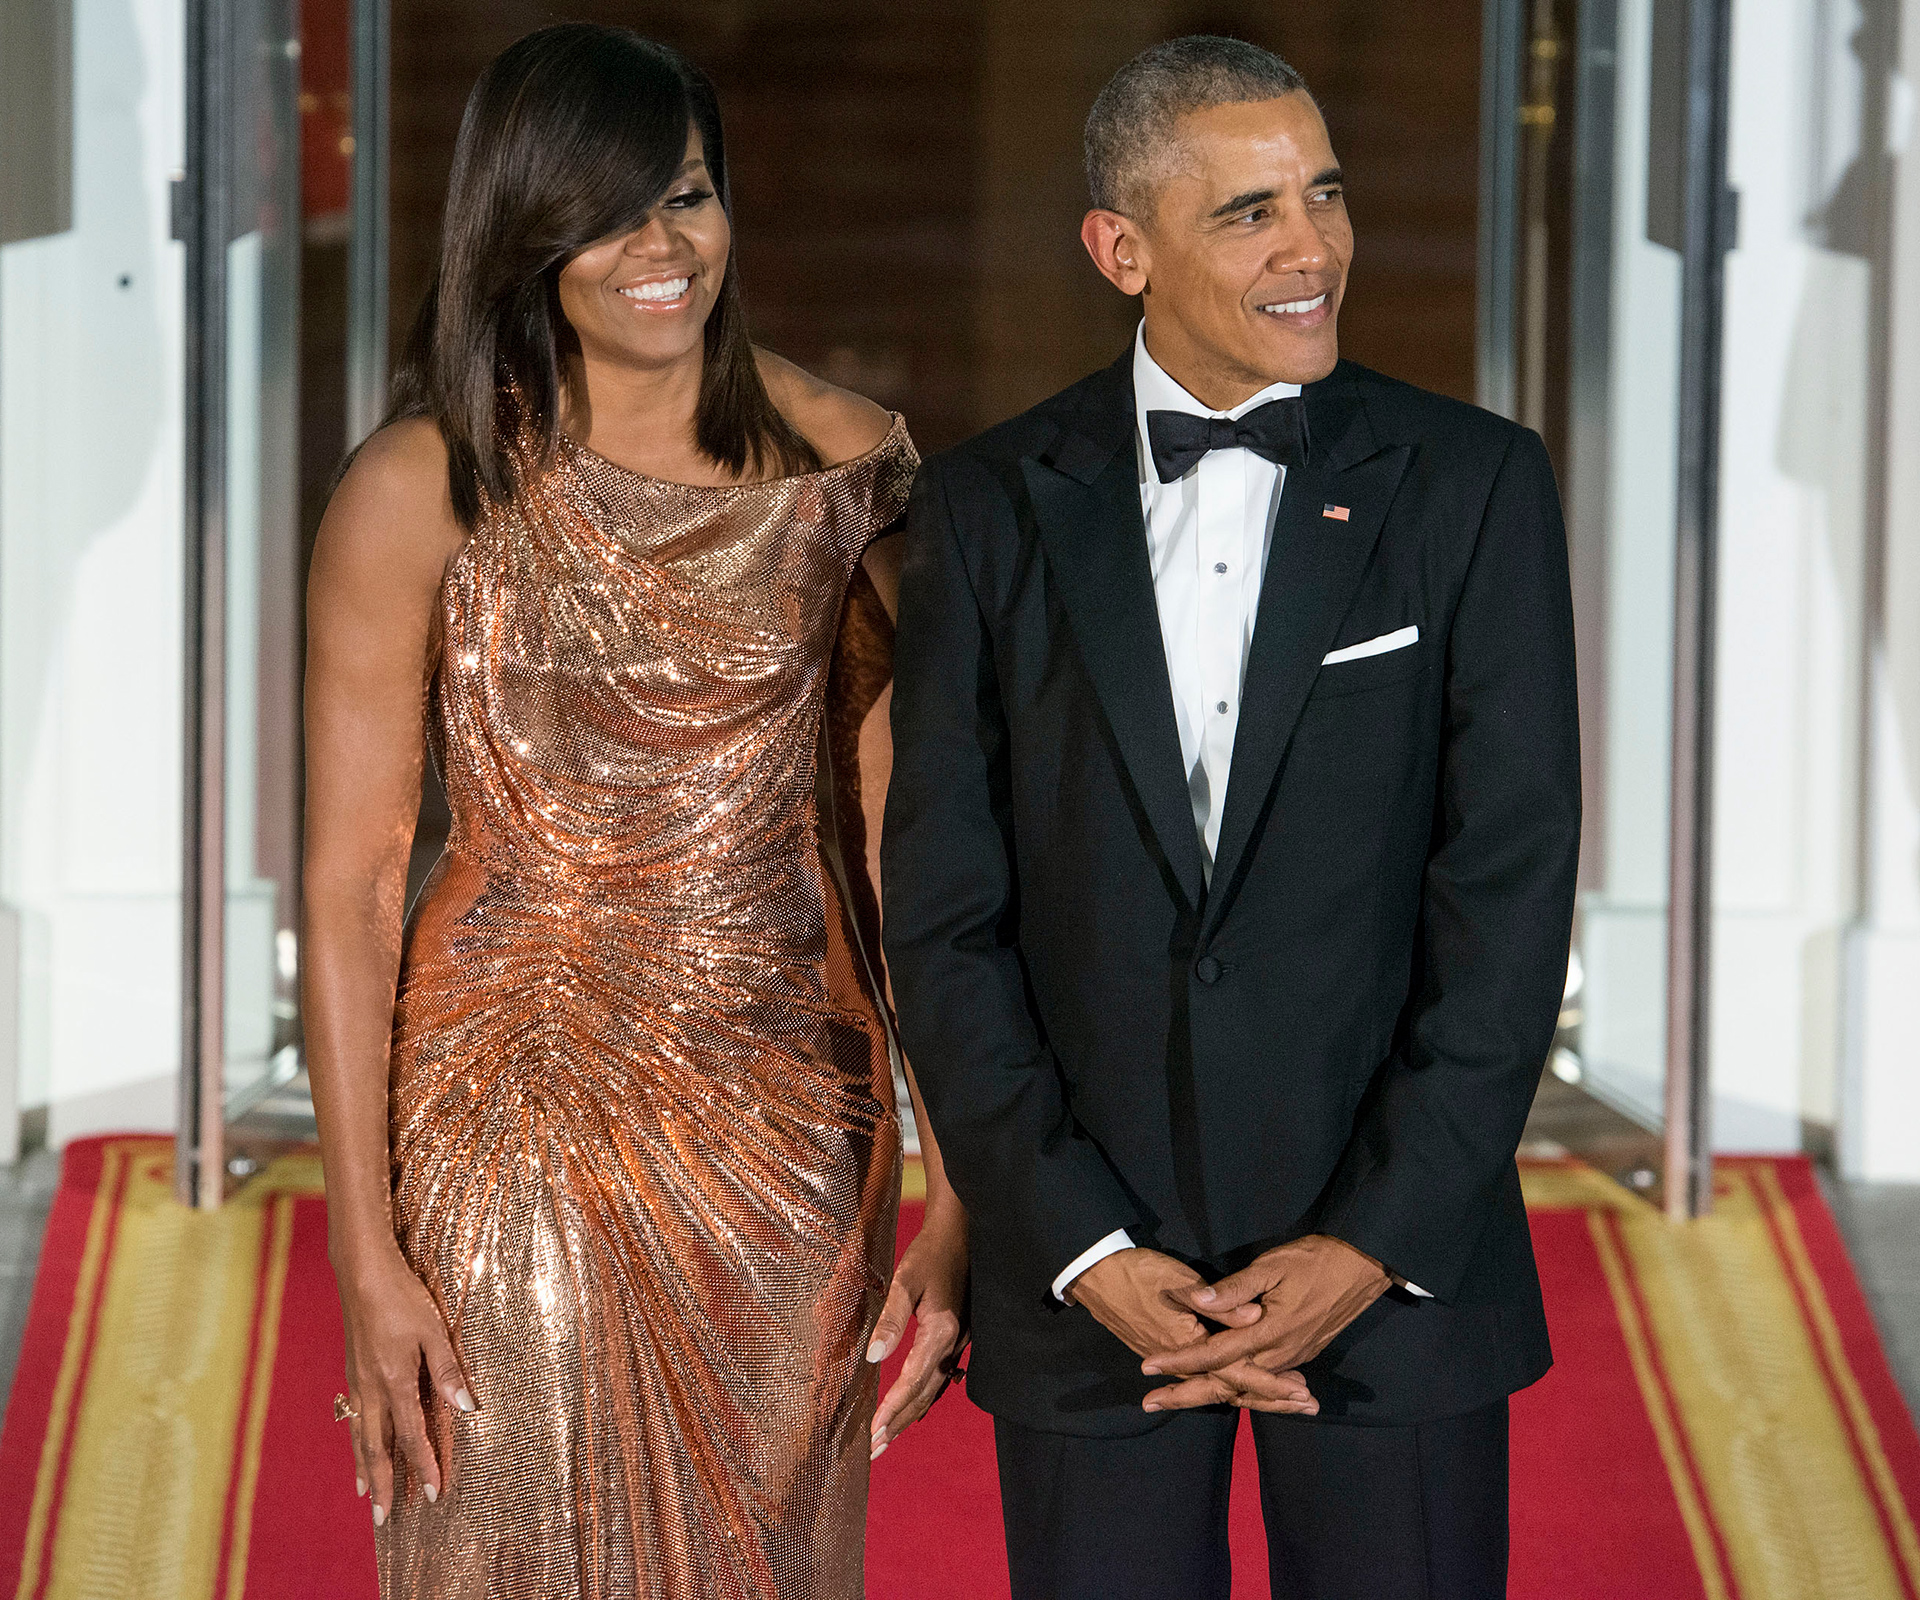 Michelle Obama sizzles in stunning Versace gown